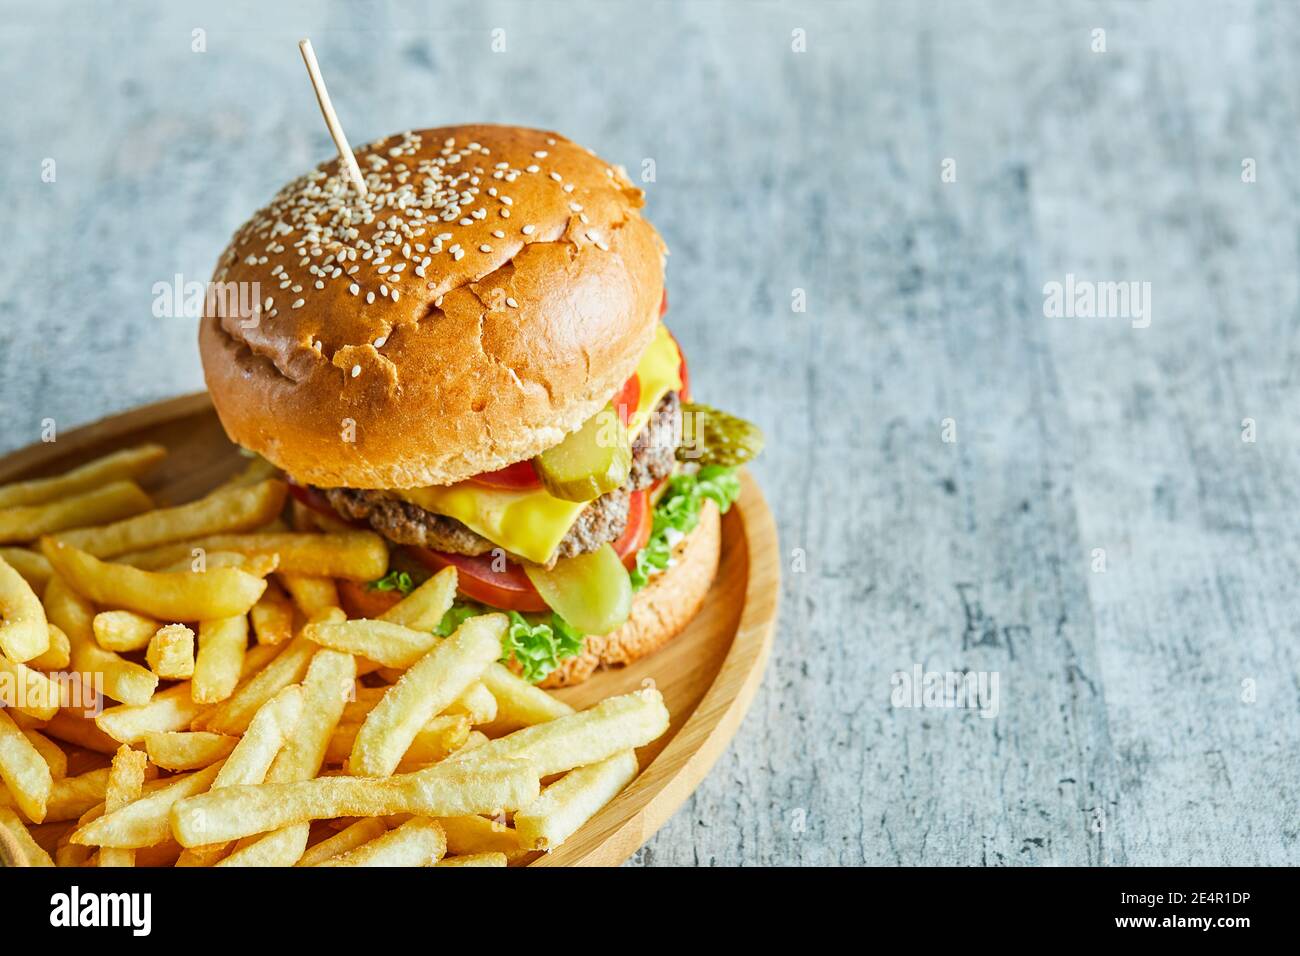 Big burger with fry potato in the wooden plate on the marble background Stock Photo